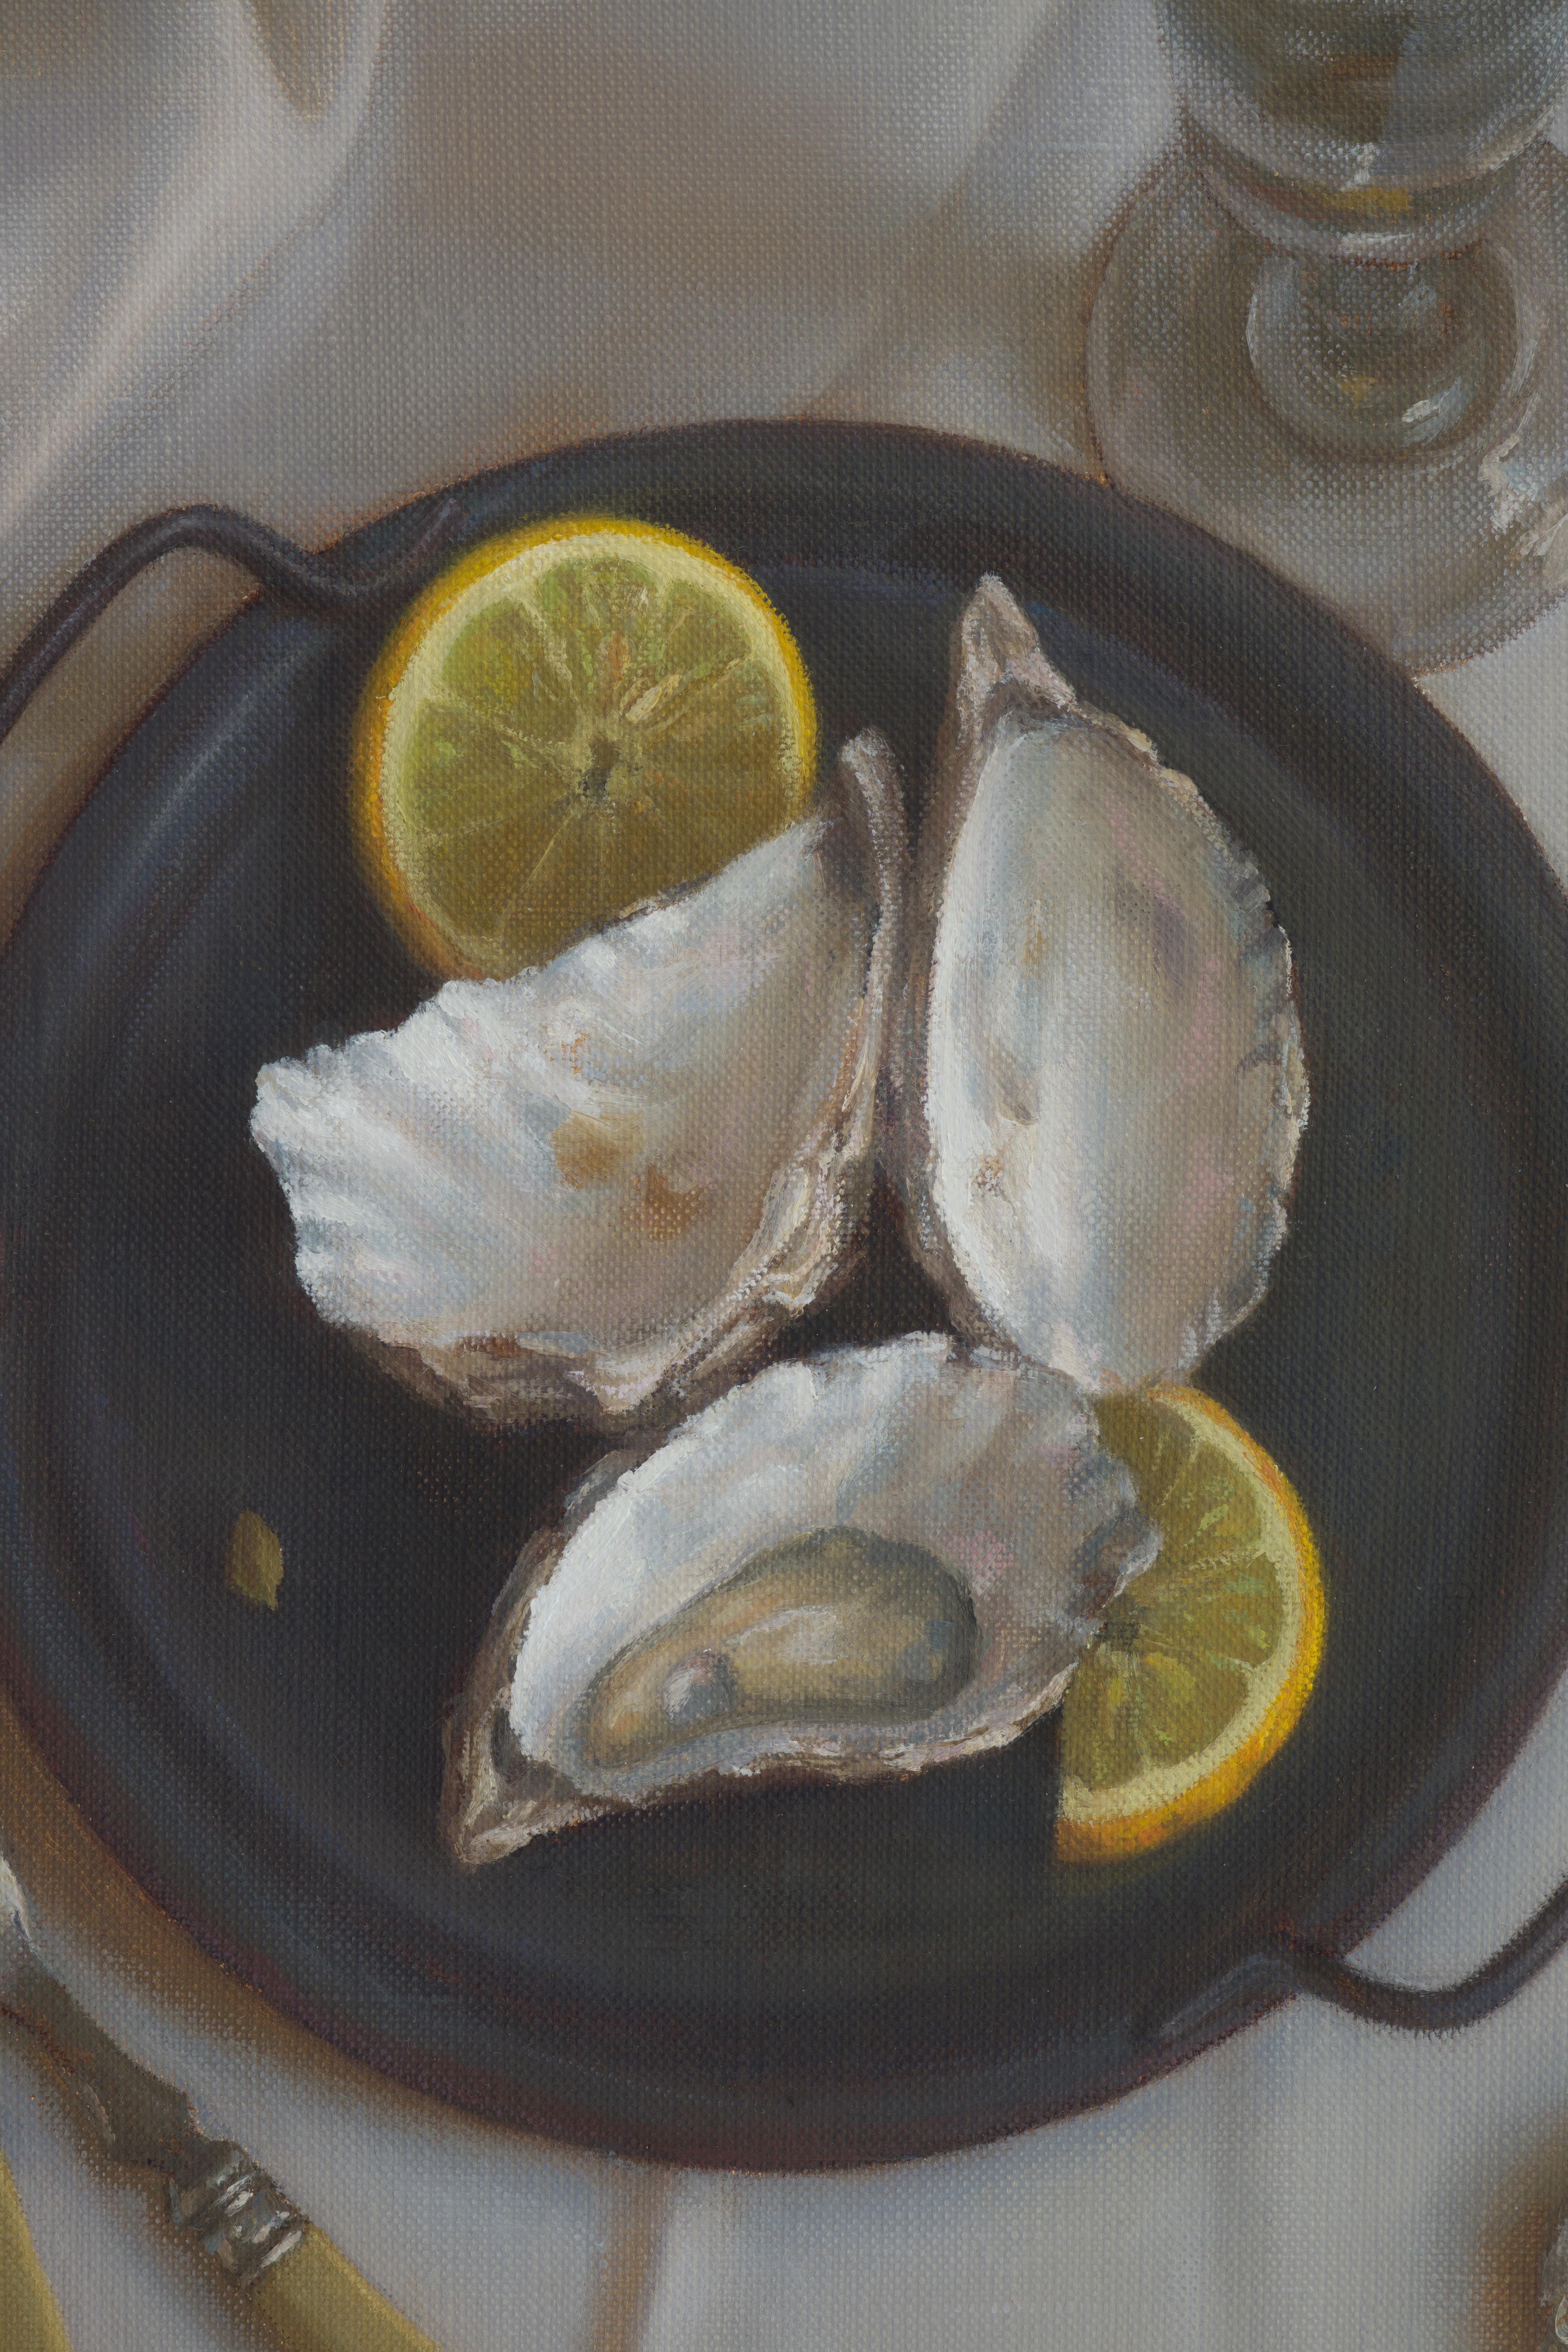 The bird’s eye view, strong light on the mother-of-pearl of oysters and folds create this image. The medium used is oil on canvas, which allows to capture the vibrant color, delicate texture, and the play of light on the subject matter. The